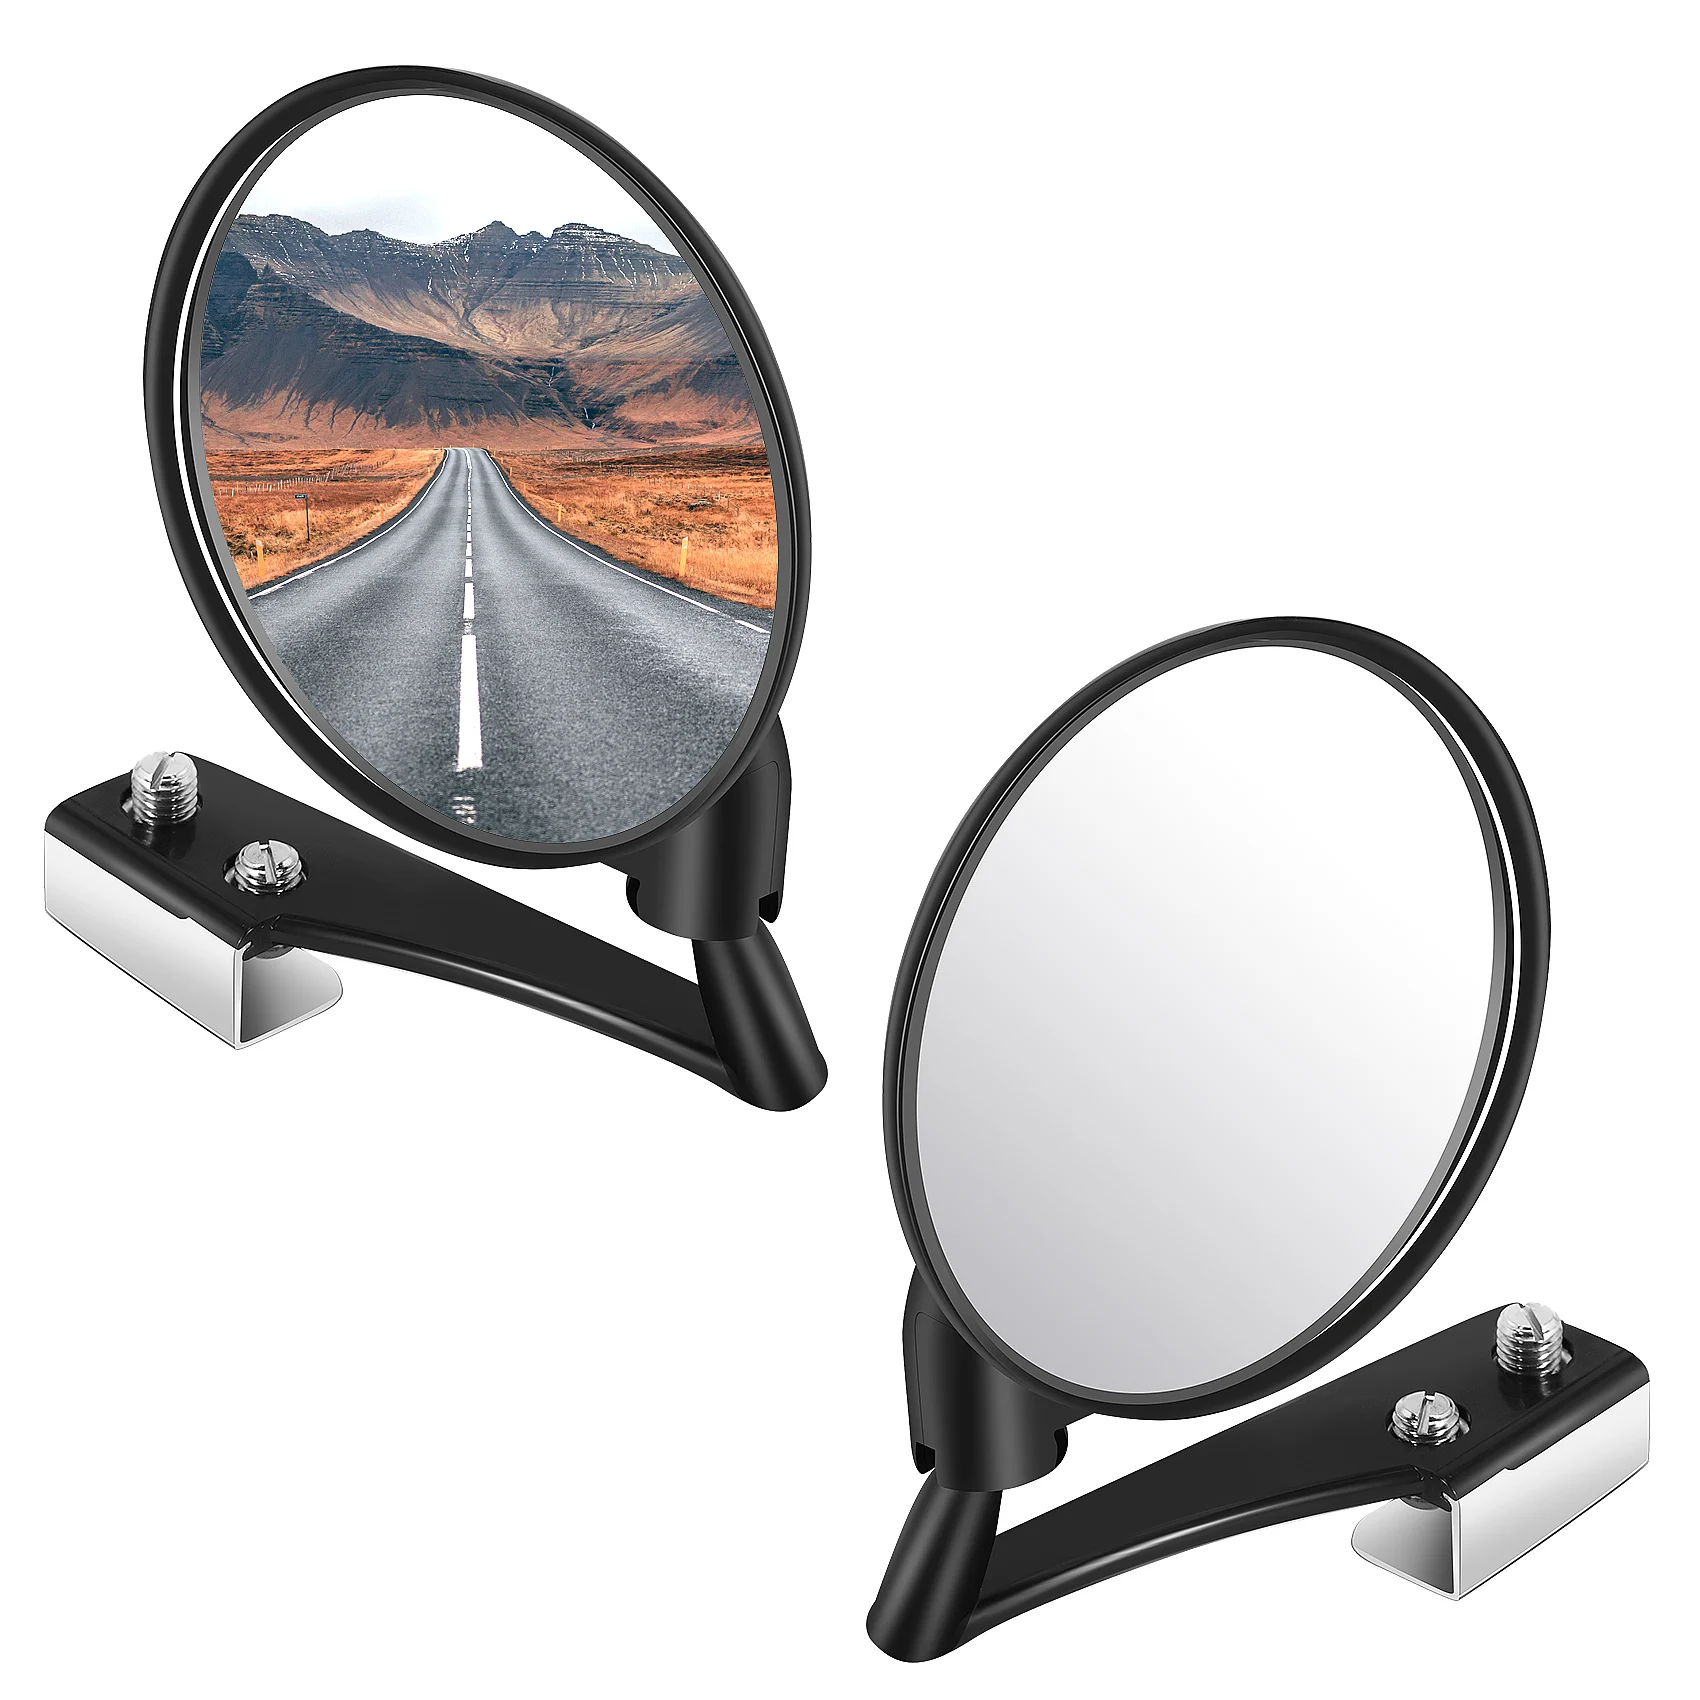 

1 Set of 2 Car Blind Spot Mirrors Car Side Convex Mirror Wide Angle Round Car Rear View Mirror